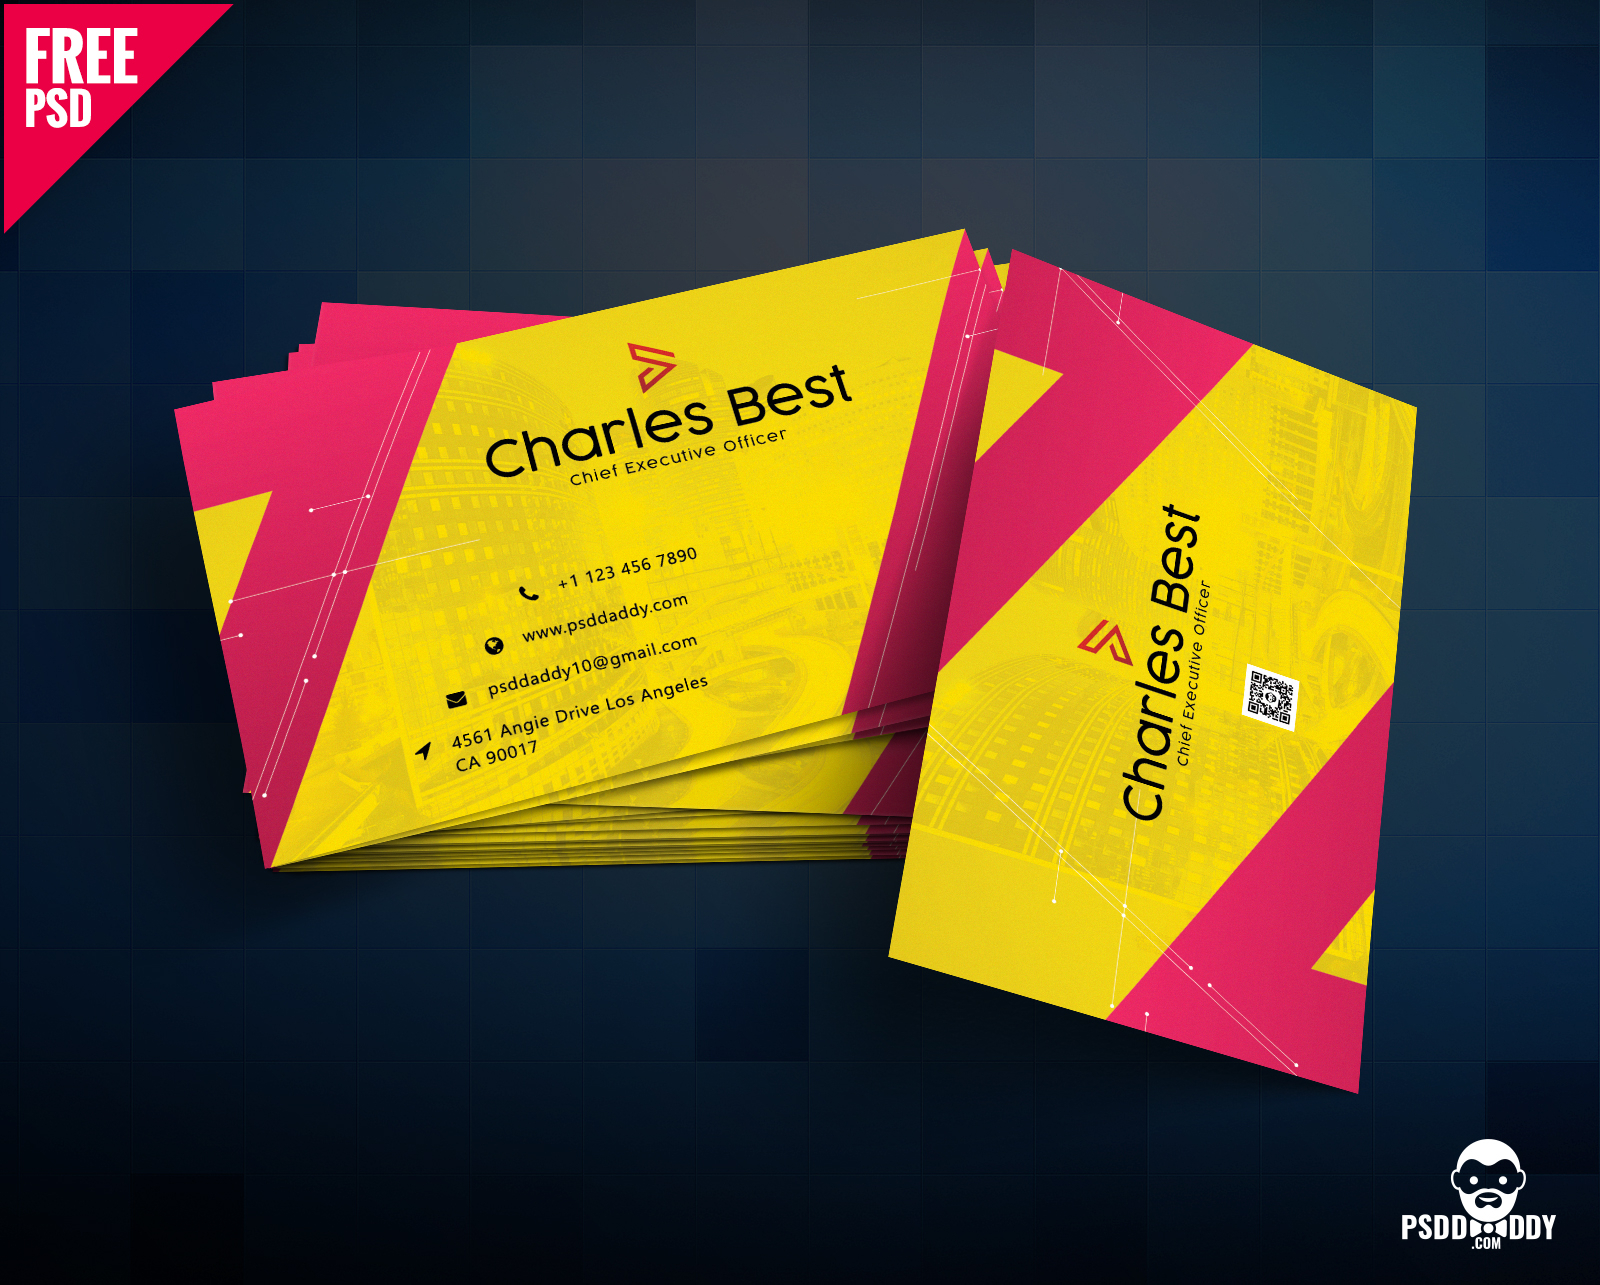 Download] Creative Business Card Free Psd | Psddaddy In Creative Business Card Templates Psd